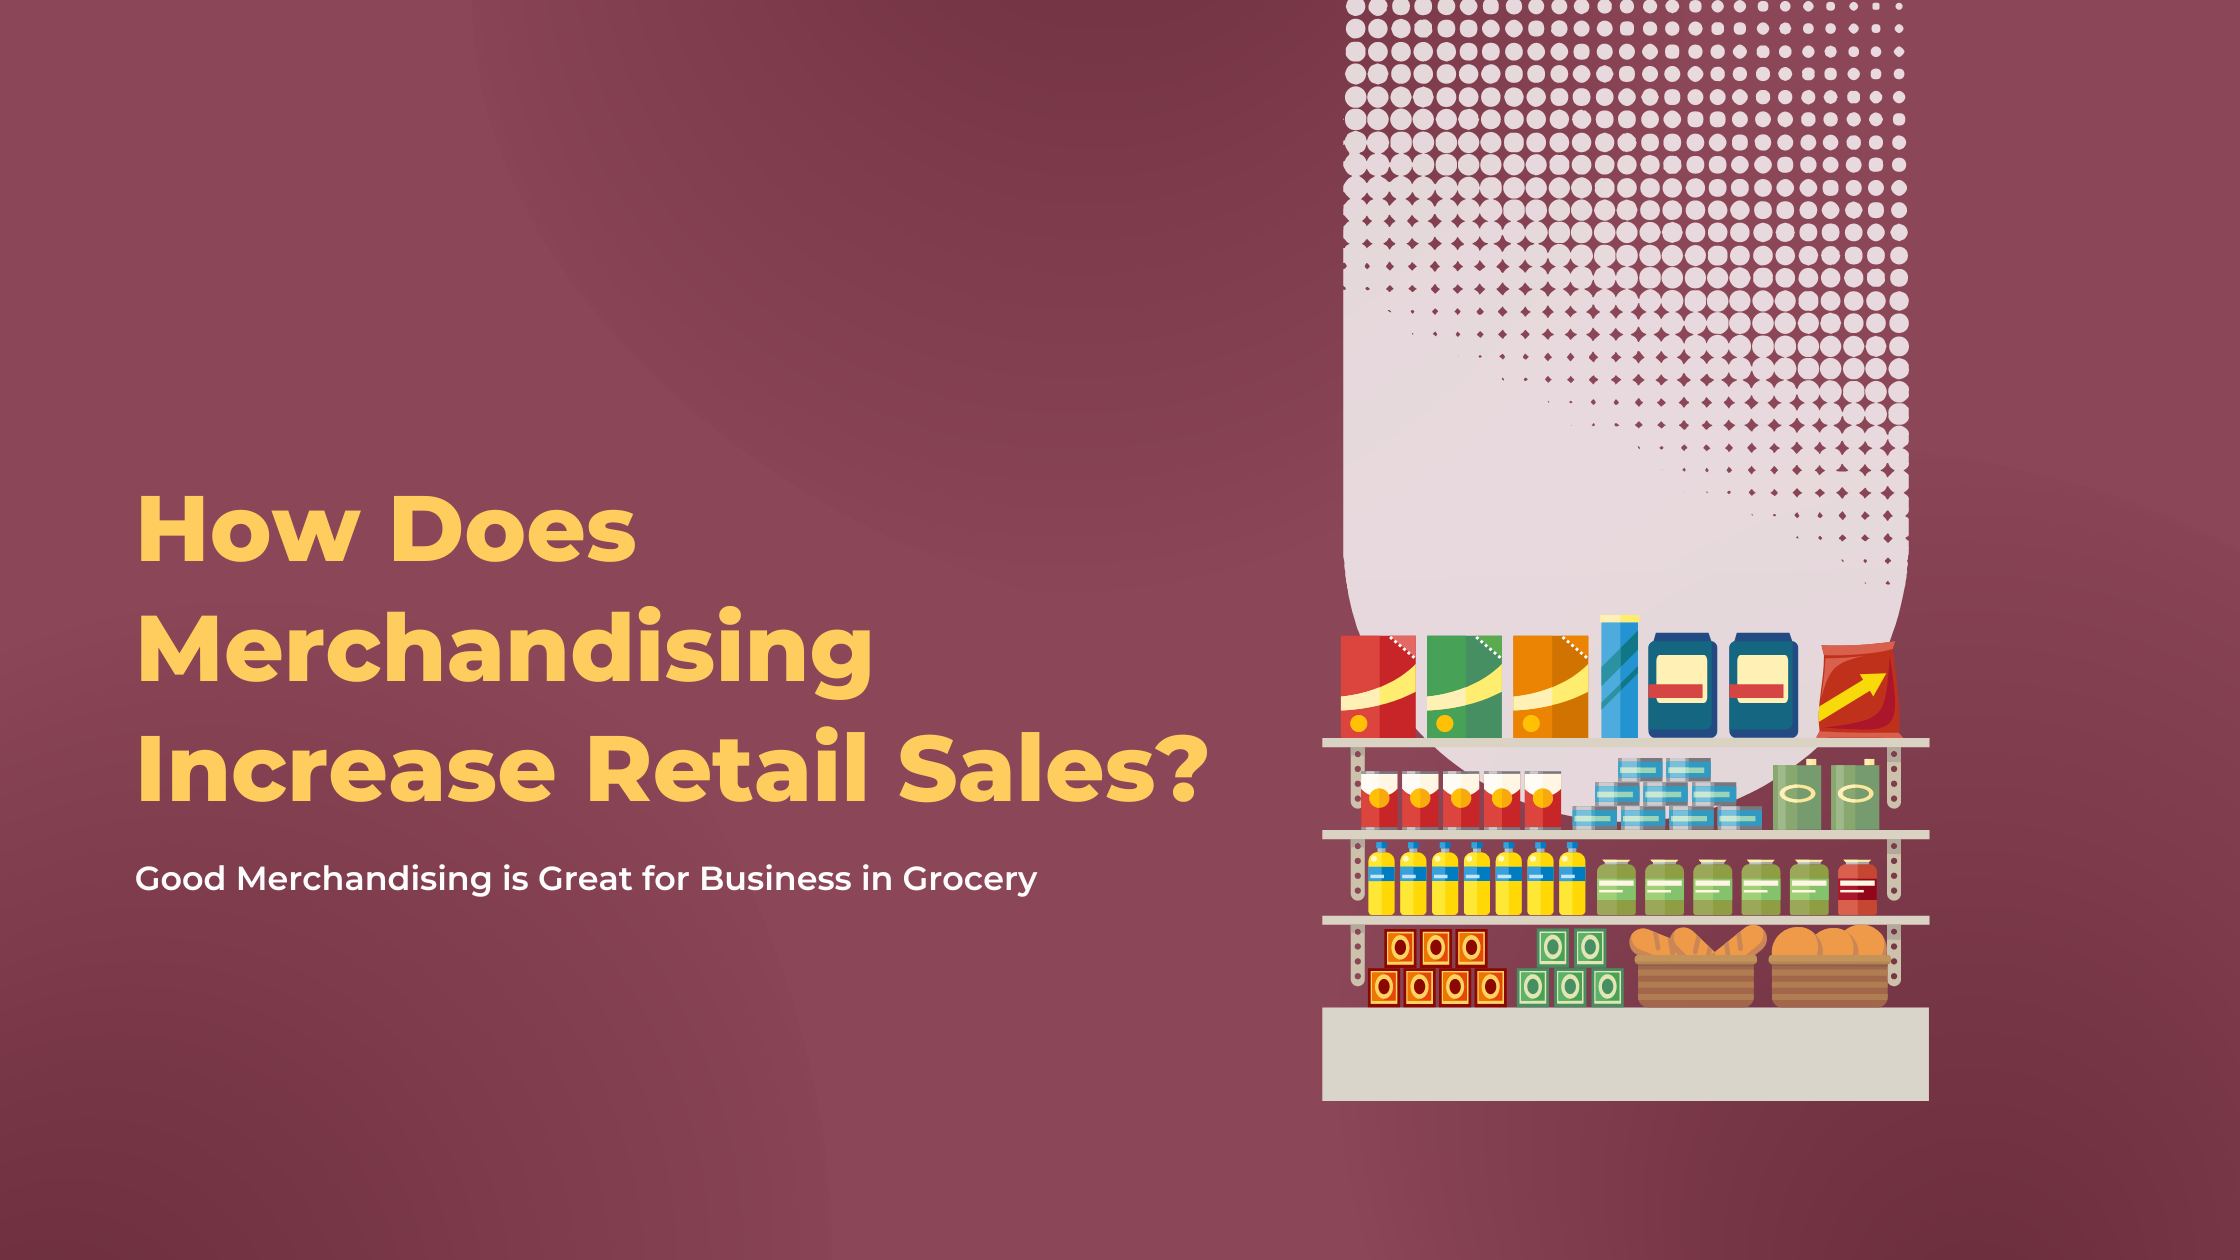 How Does Merchandising Increase Retail Sales